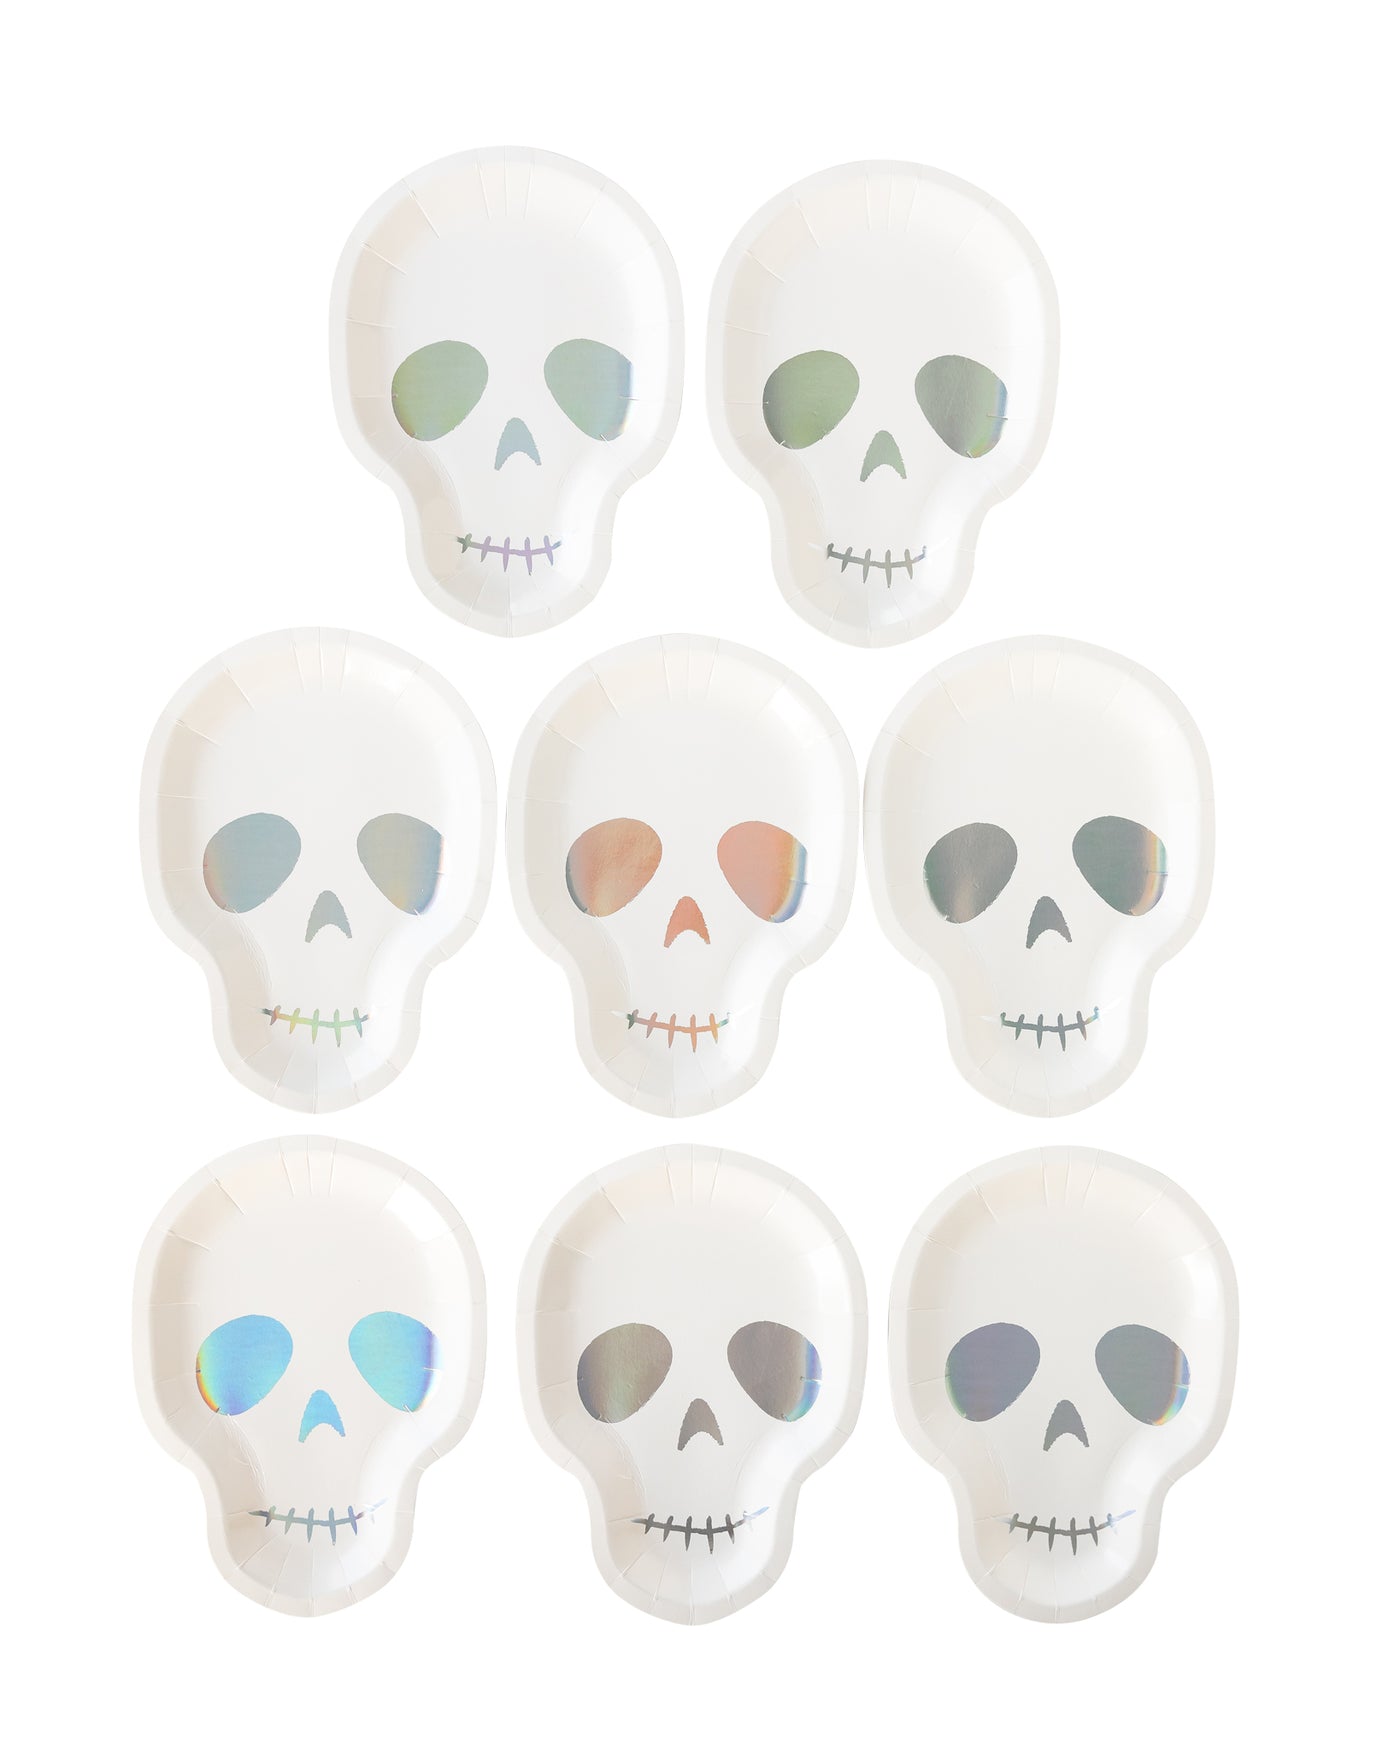 PLTS337G - Holographic Skull Shaped Plates